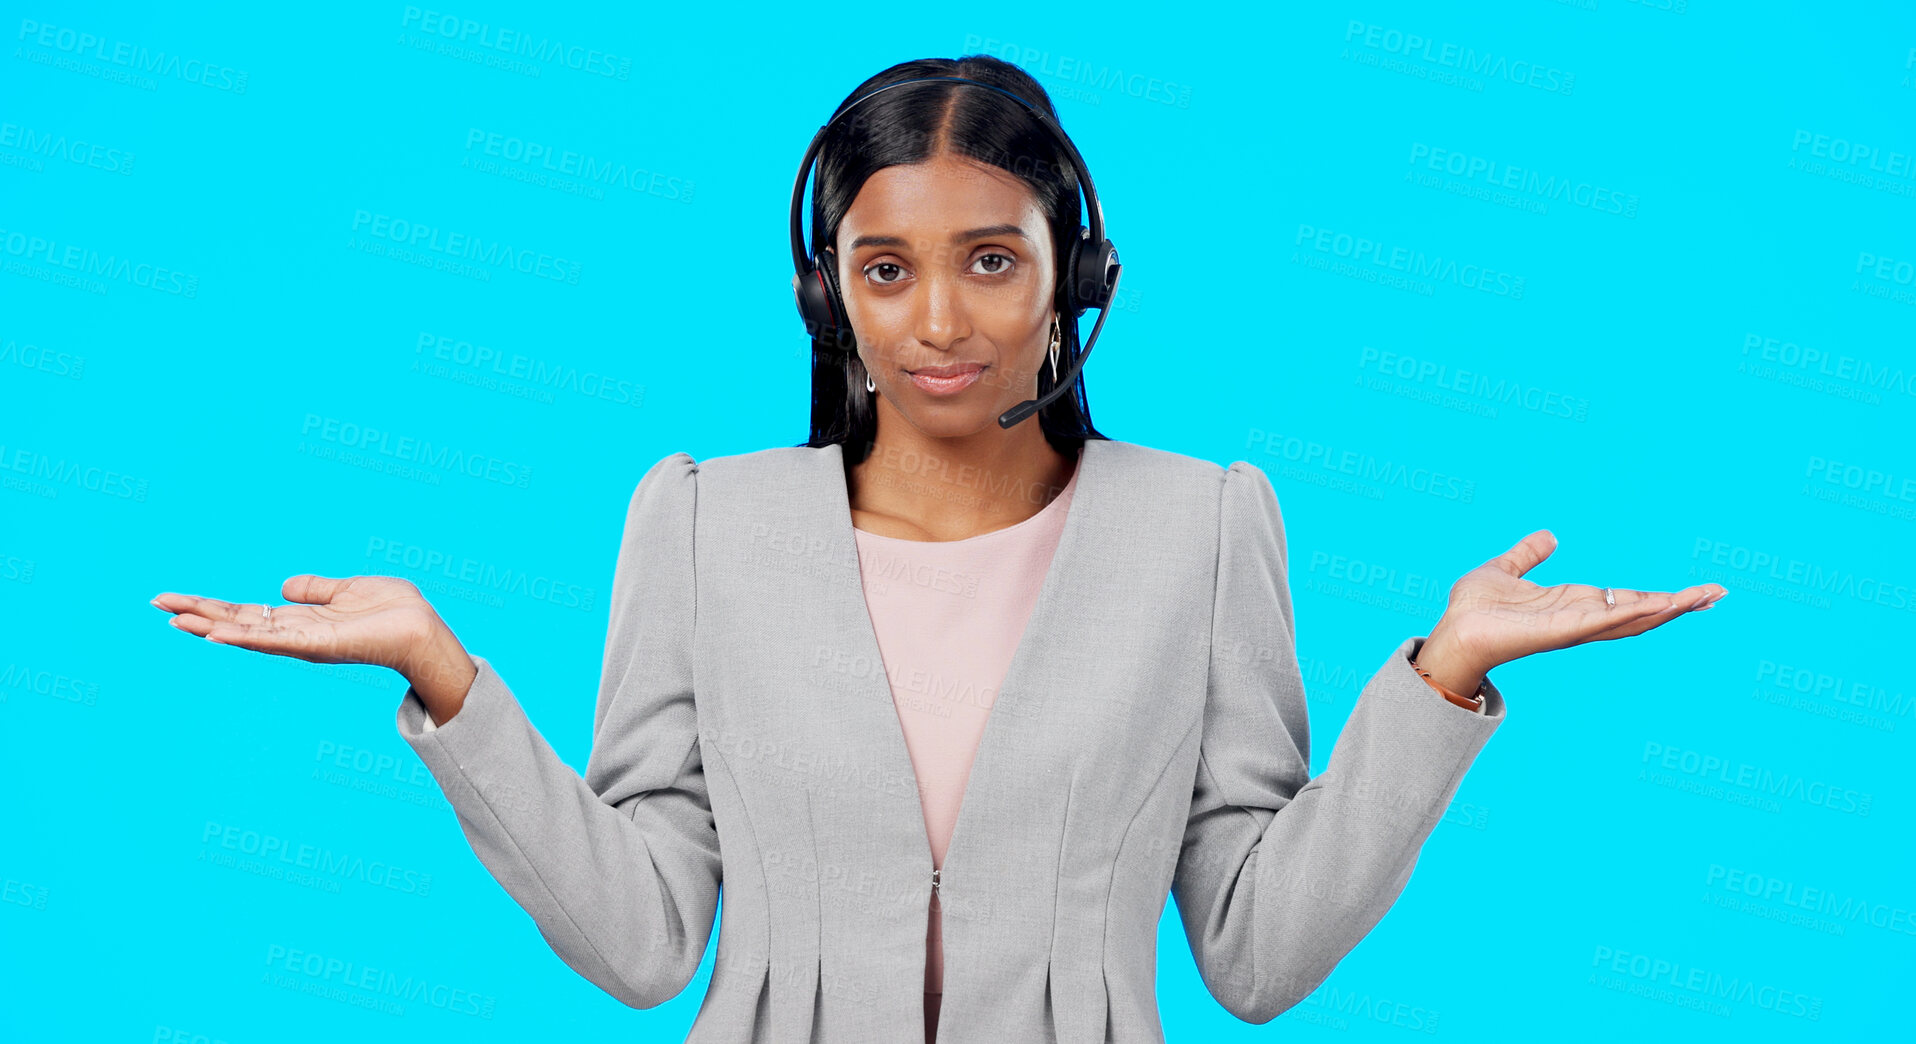 Buy stock photo Business woman, confused and call center with options in decision, doubt or choice against a blue studio background. Portrait of female person, consultant or agent with hands out in telemarketing